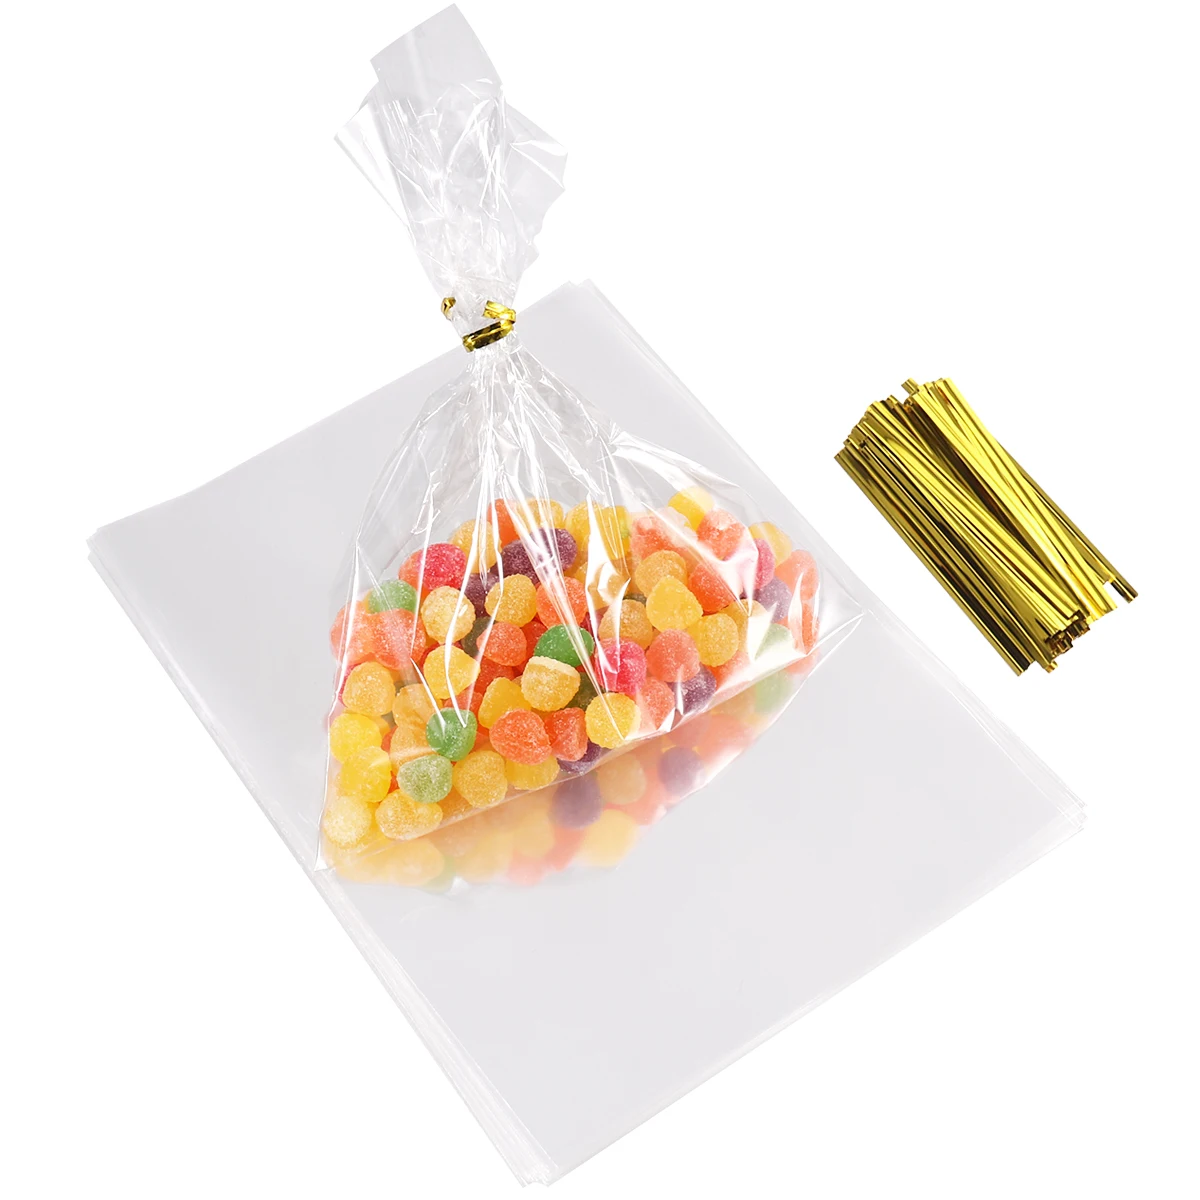 100PCS Sweet Bags 5.12 inches Clear Treat Bags Plastic Gift Bags with Twist Ties for Cookie Chocolates Wedding 8.27 